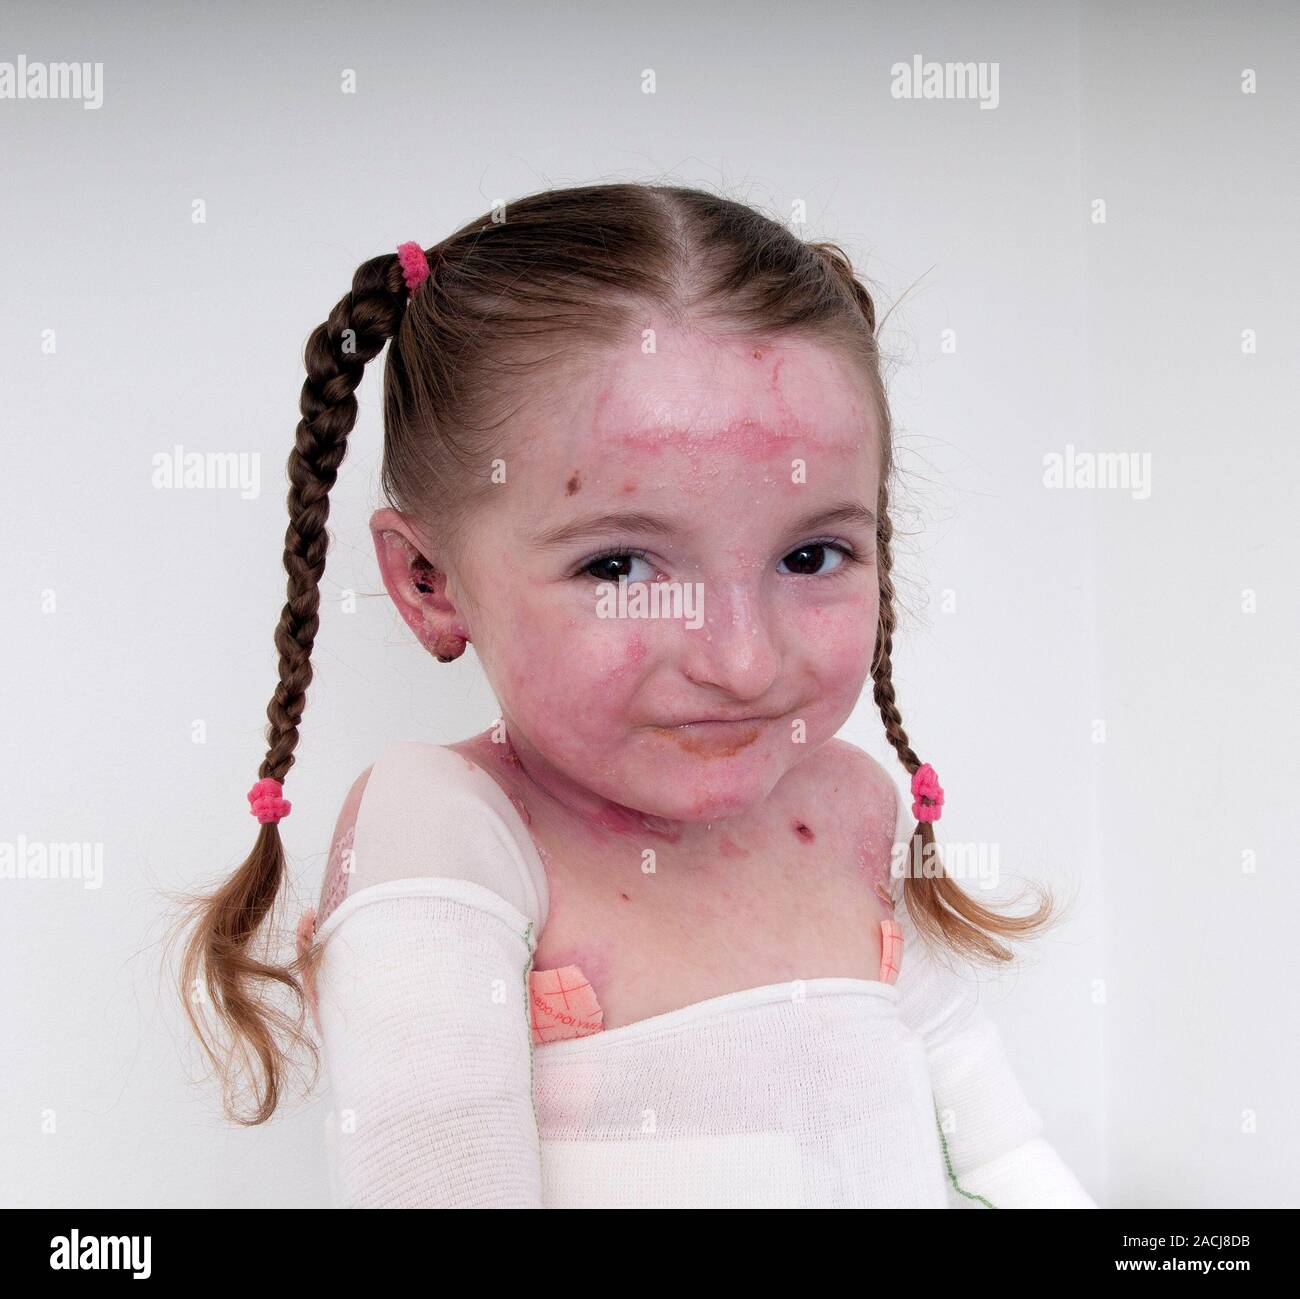 Genetic condition. Five-year old girl with recessive dystrophic Epidermolysis Bullosa (RDEB). This is a very rare genetic disease of the connective ti Stock Photo